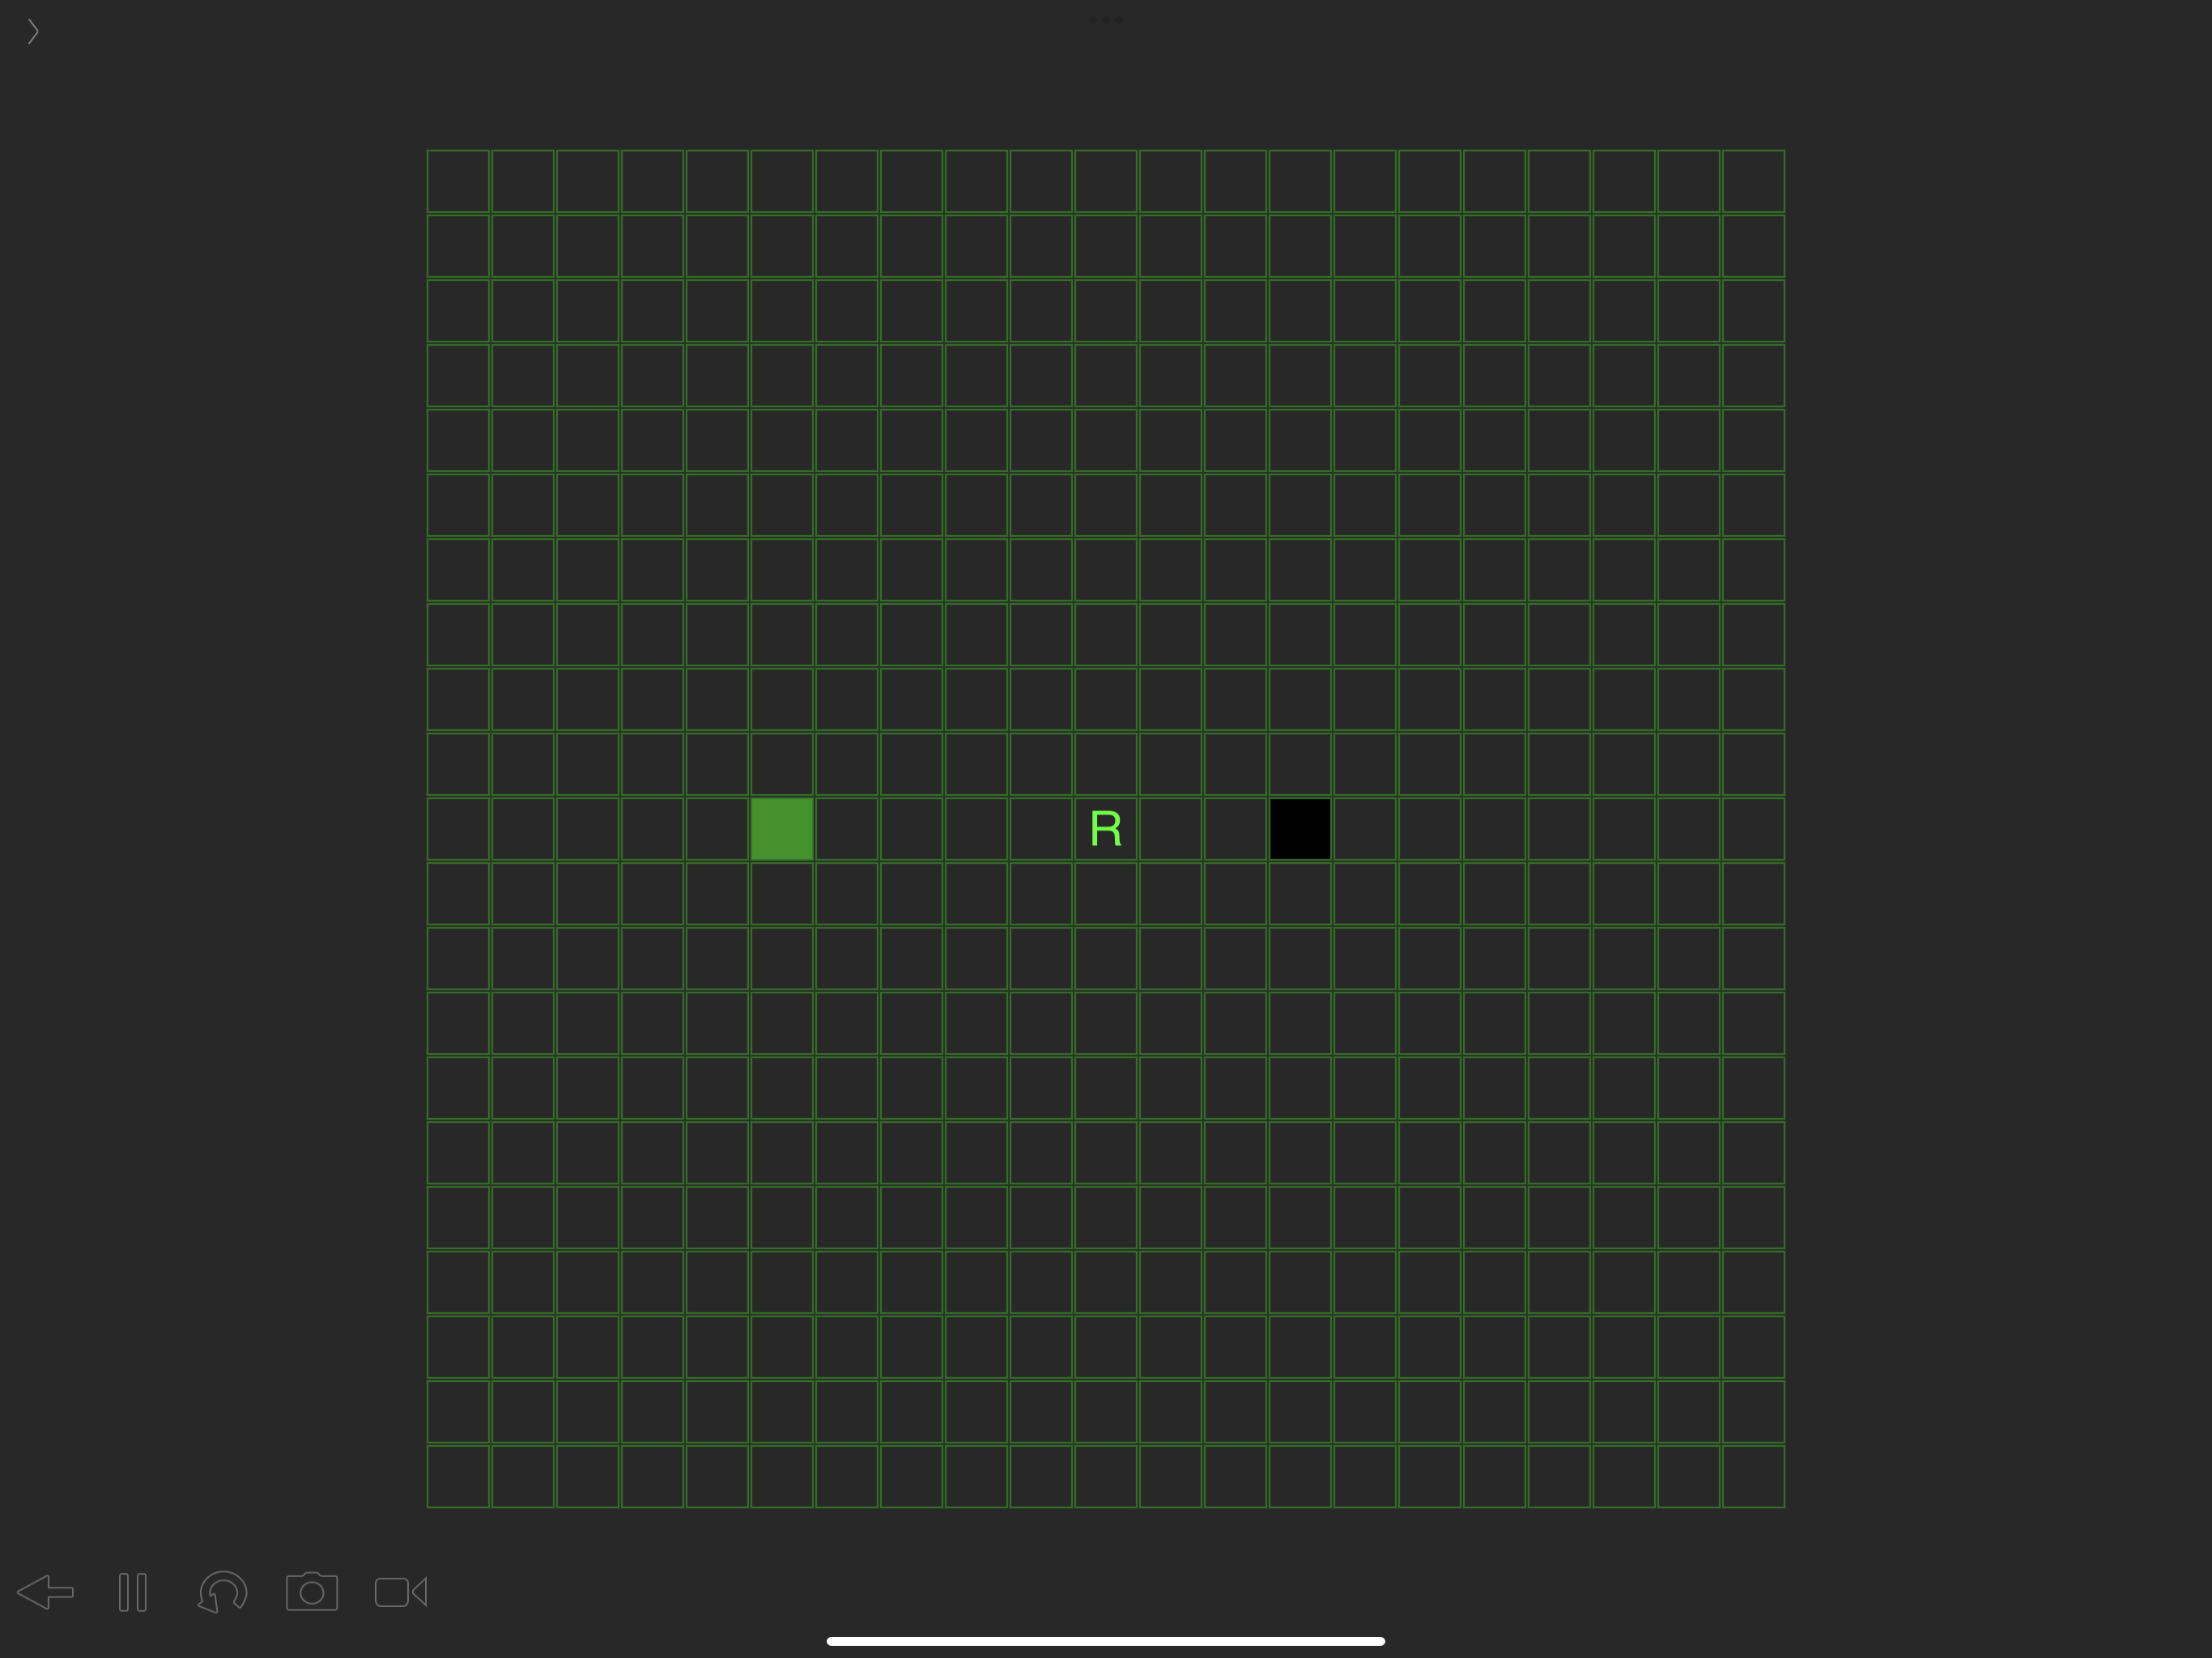 grid showing green obstacle on left black pit on right, R in middle